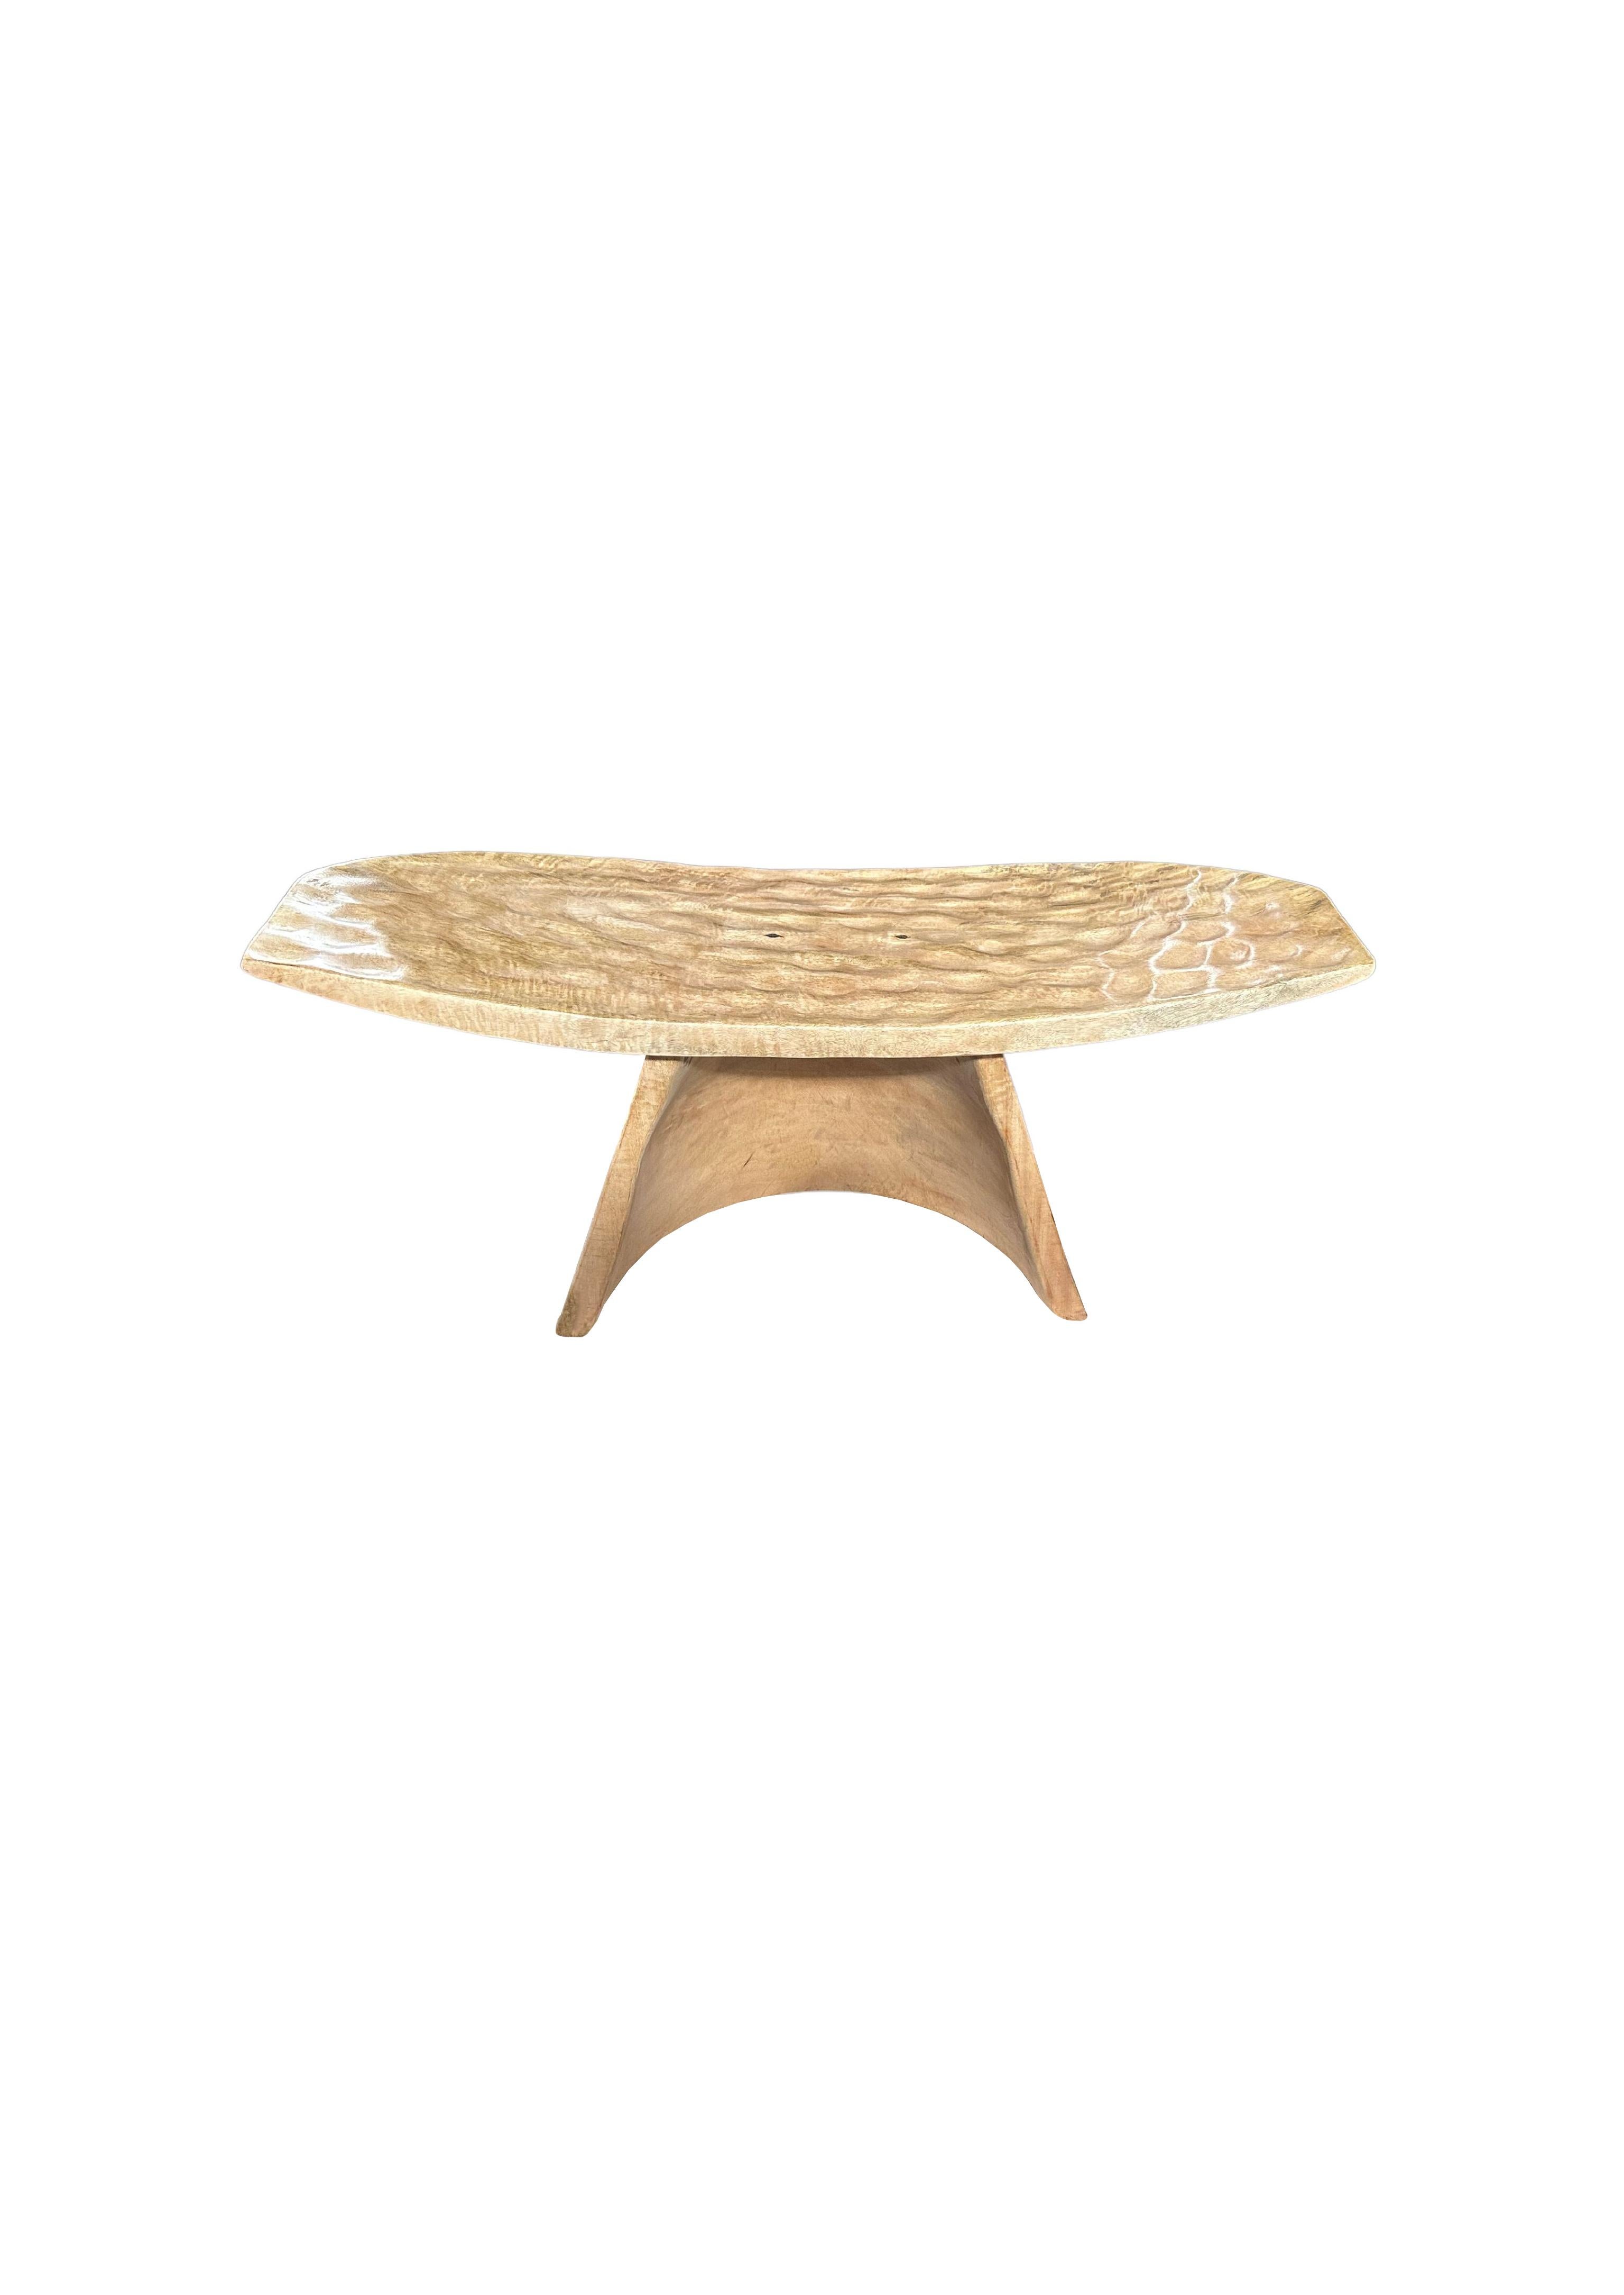 Indonesian Sculptural Stool with Curved Seat & Hand Hewn Detailing, Natural Finish For Sale